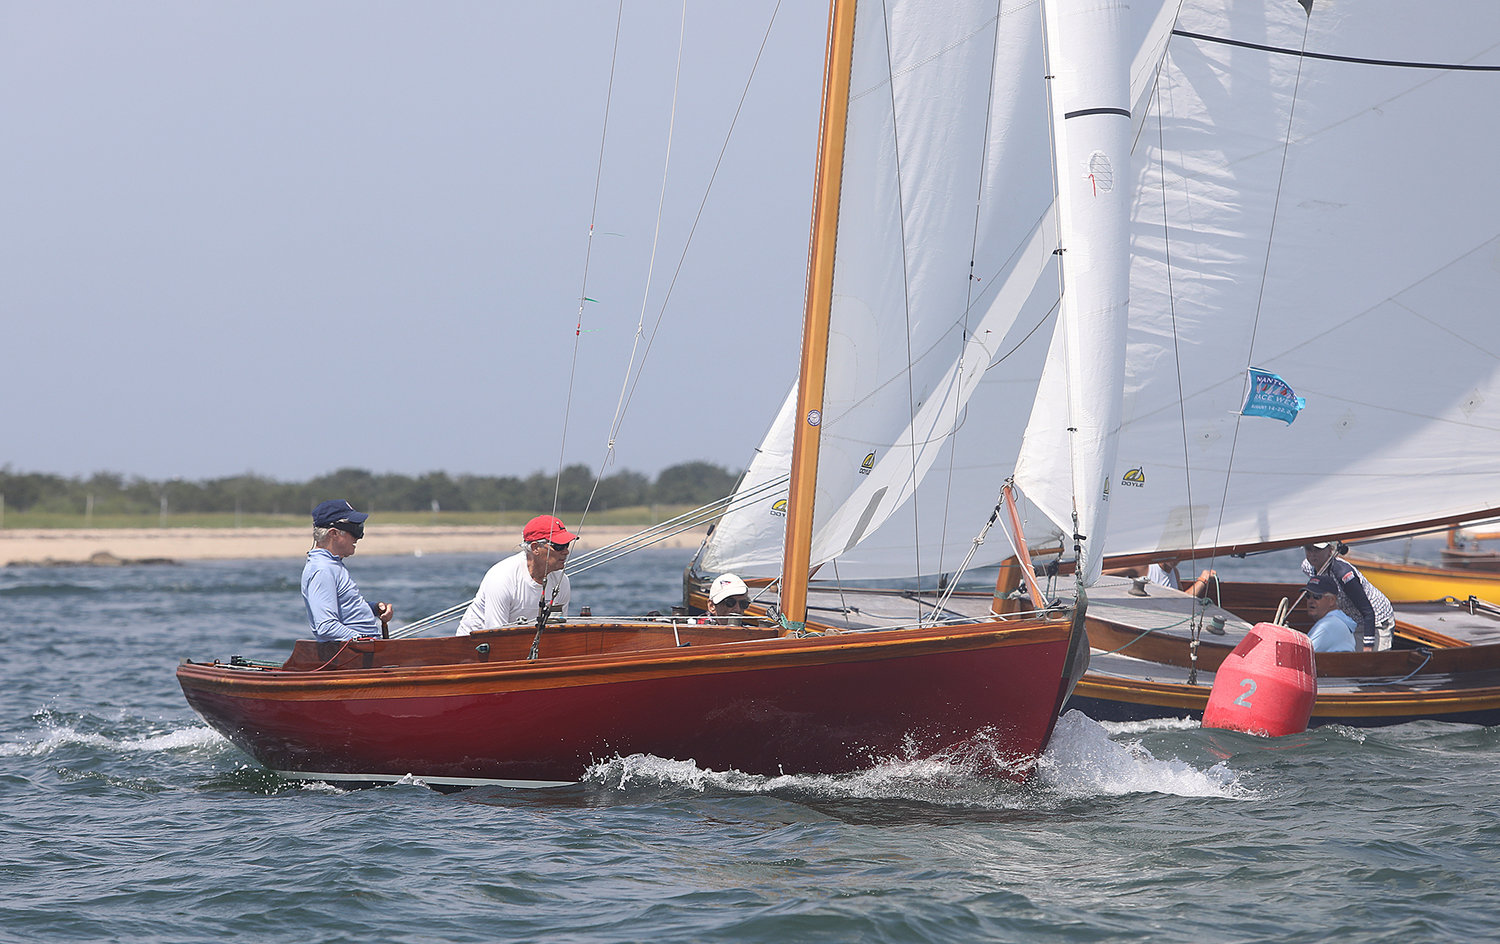 An Alerion rounds the windward mark during the One Design Regatta in Nantucket Harbor on the opening day of Race Week 2021.